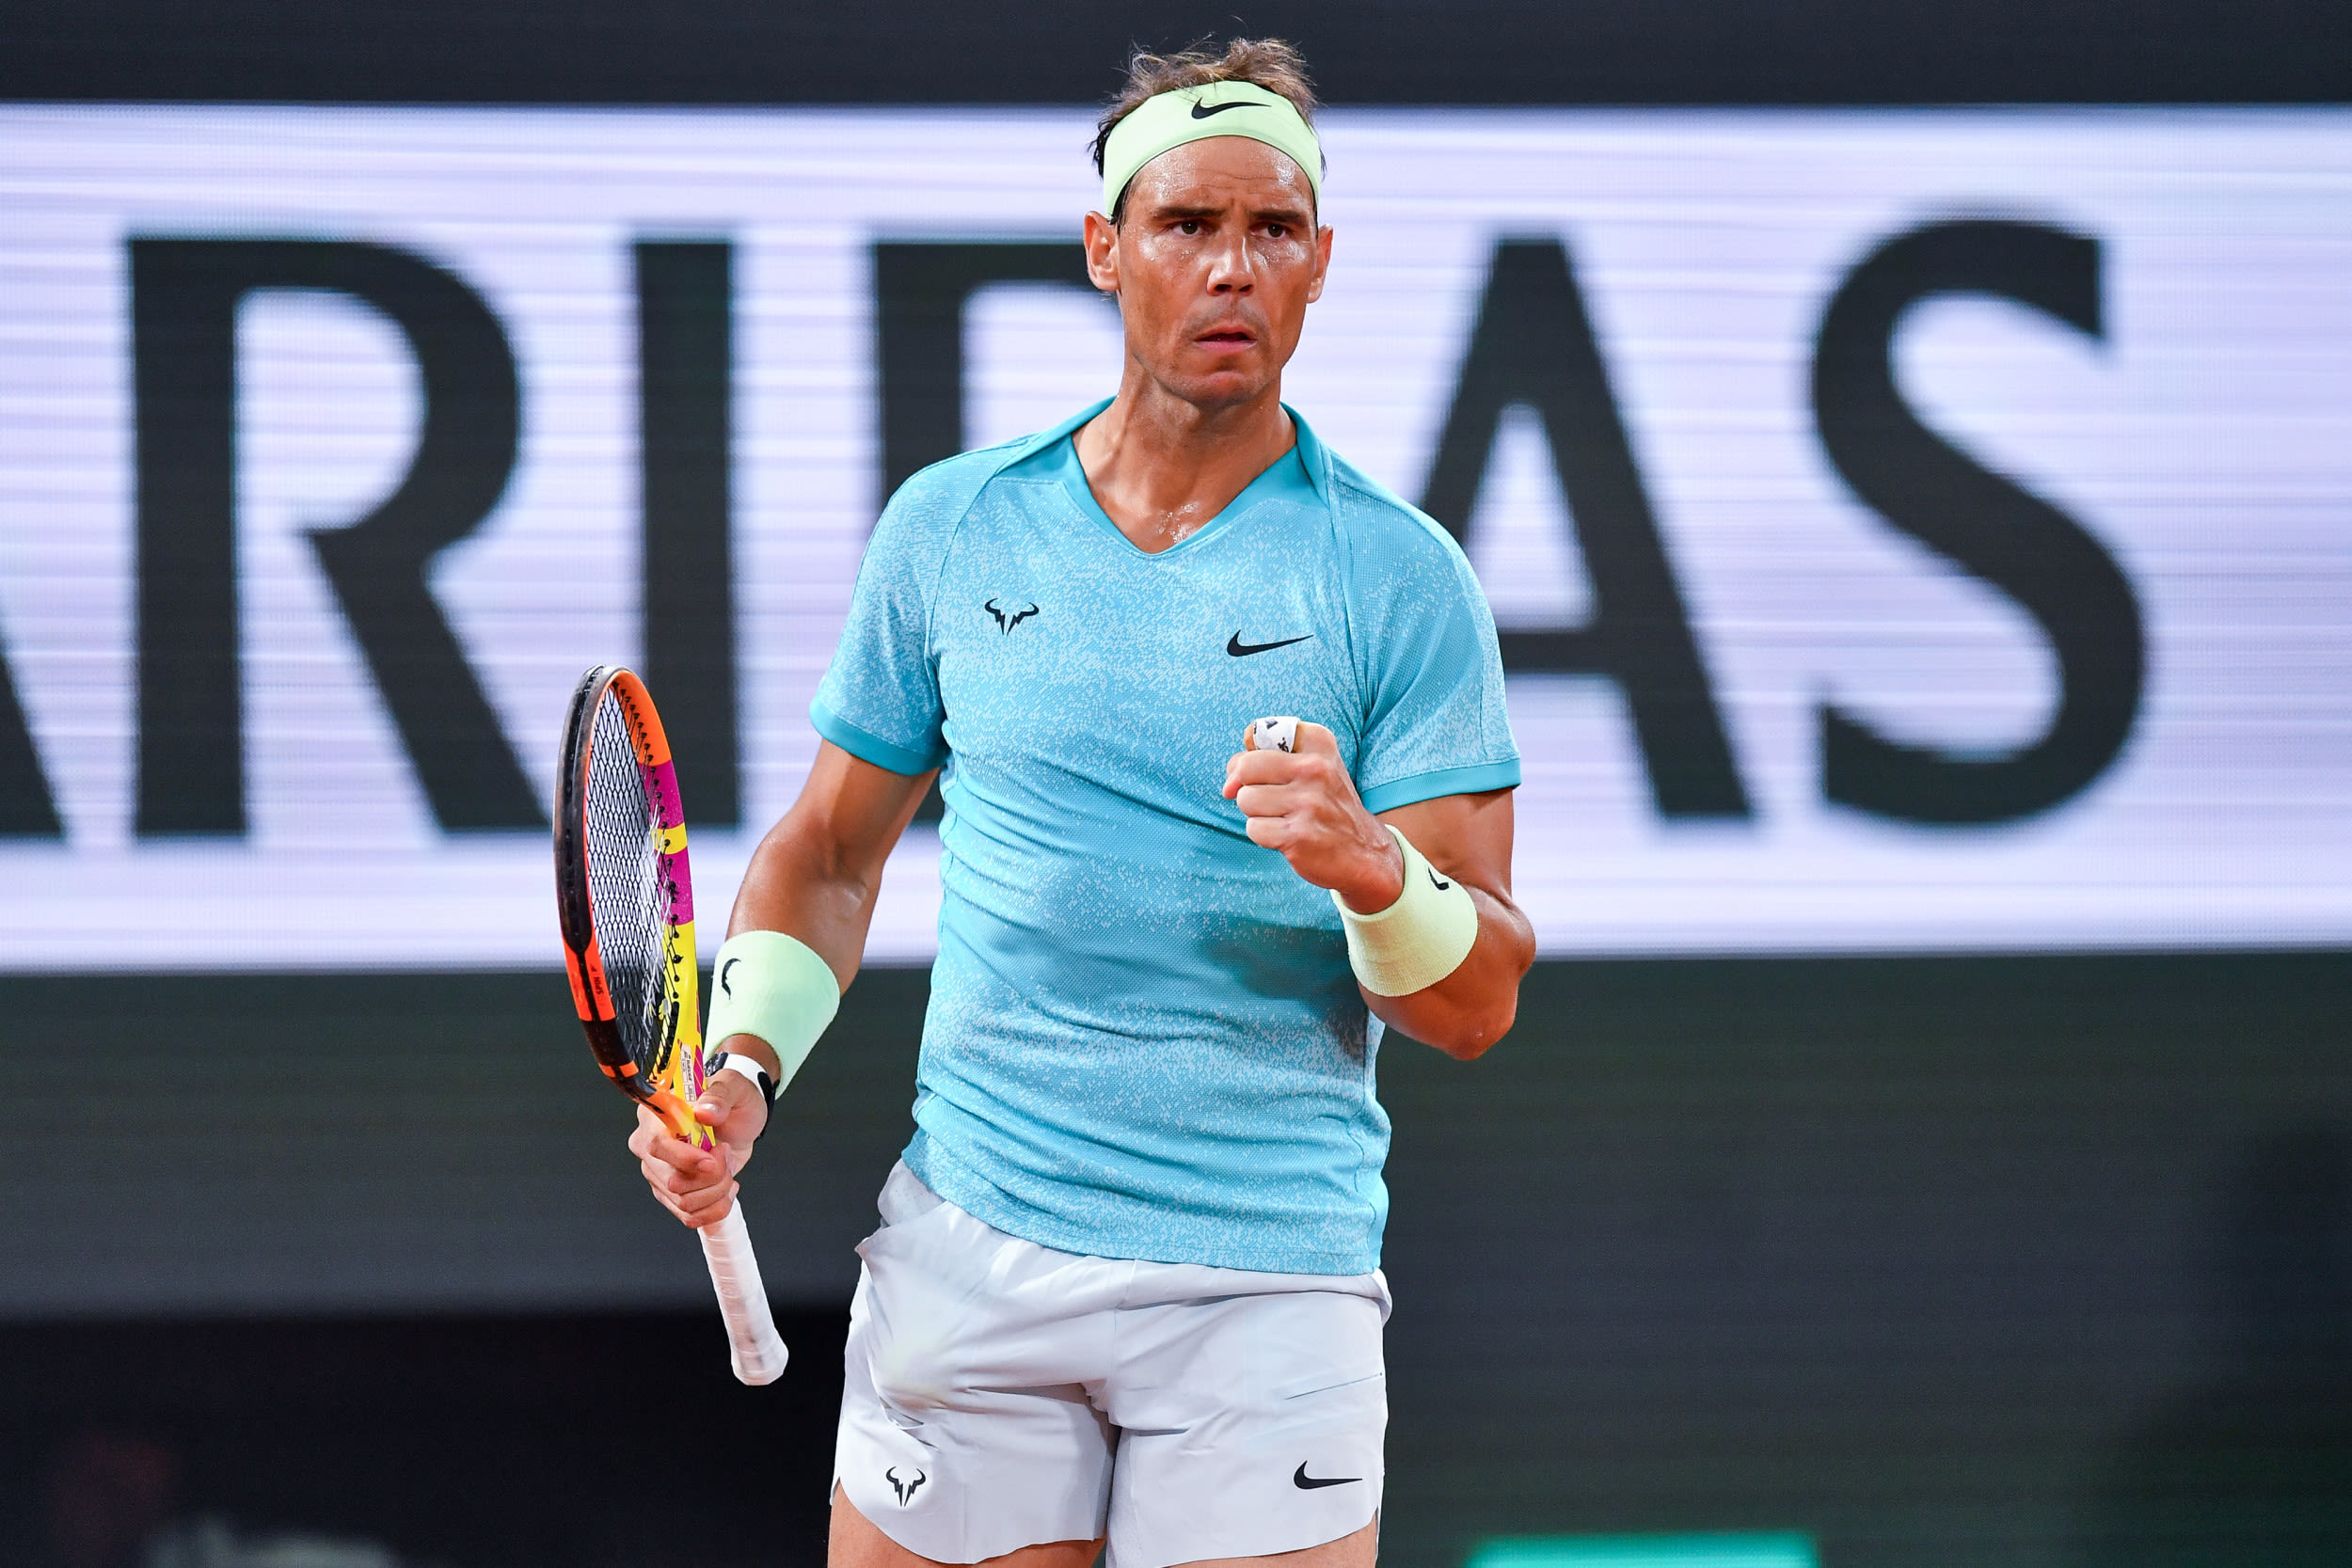 Rafael Nadal Advances to First ATP Singles Final in 2 Years at Nordea Open